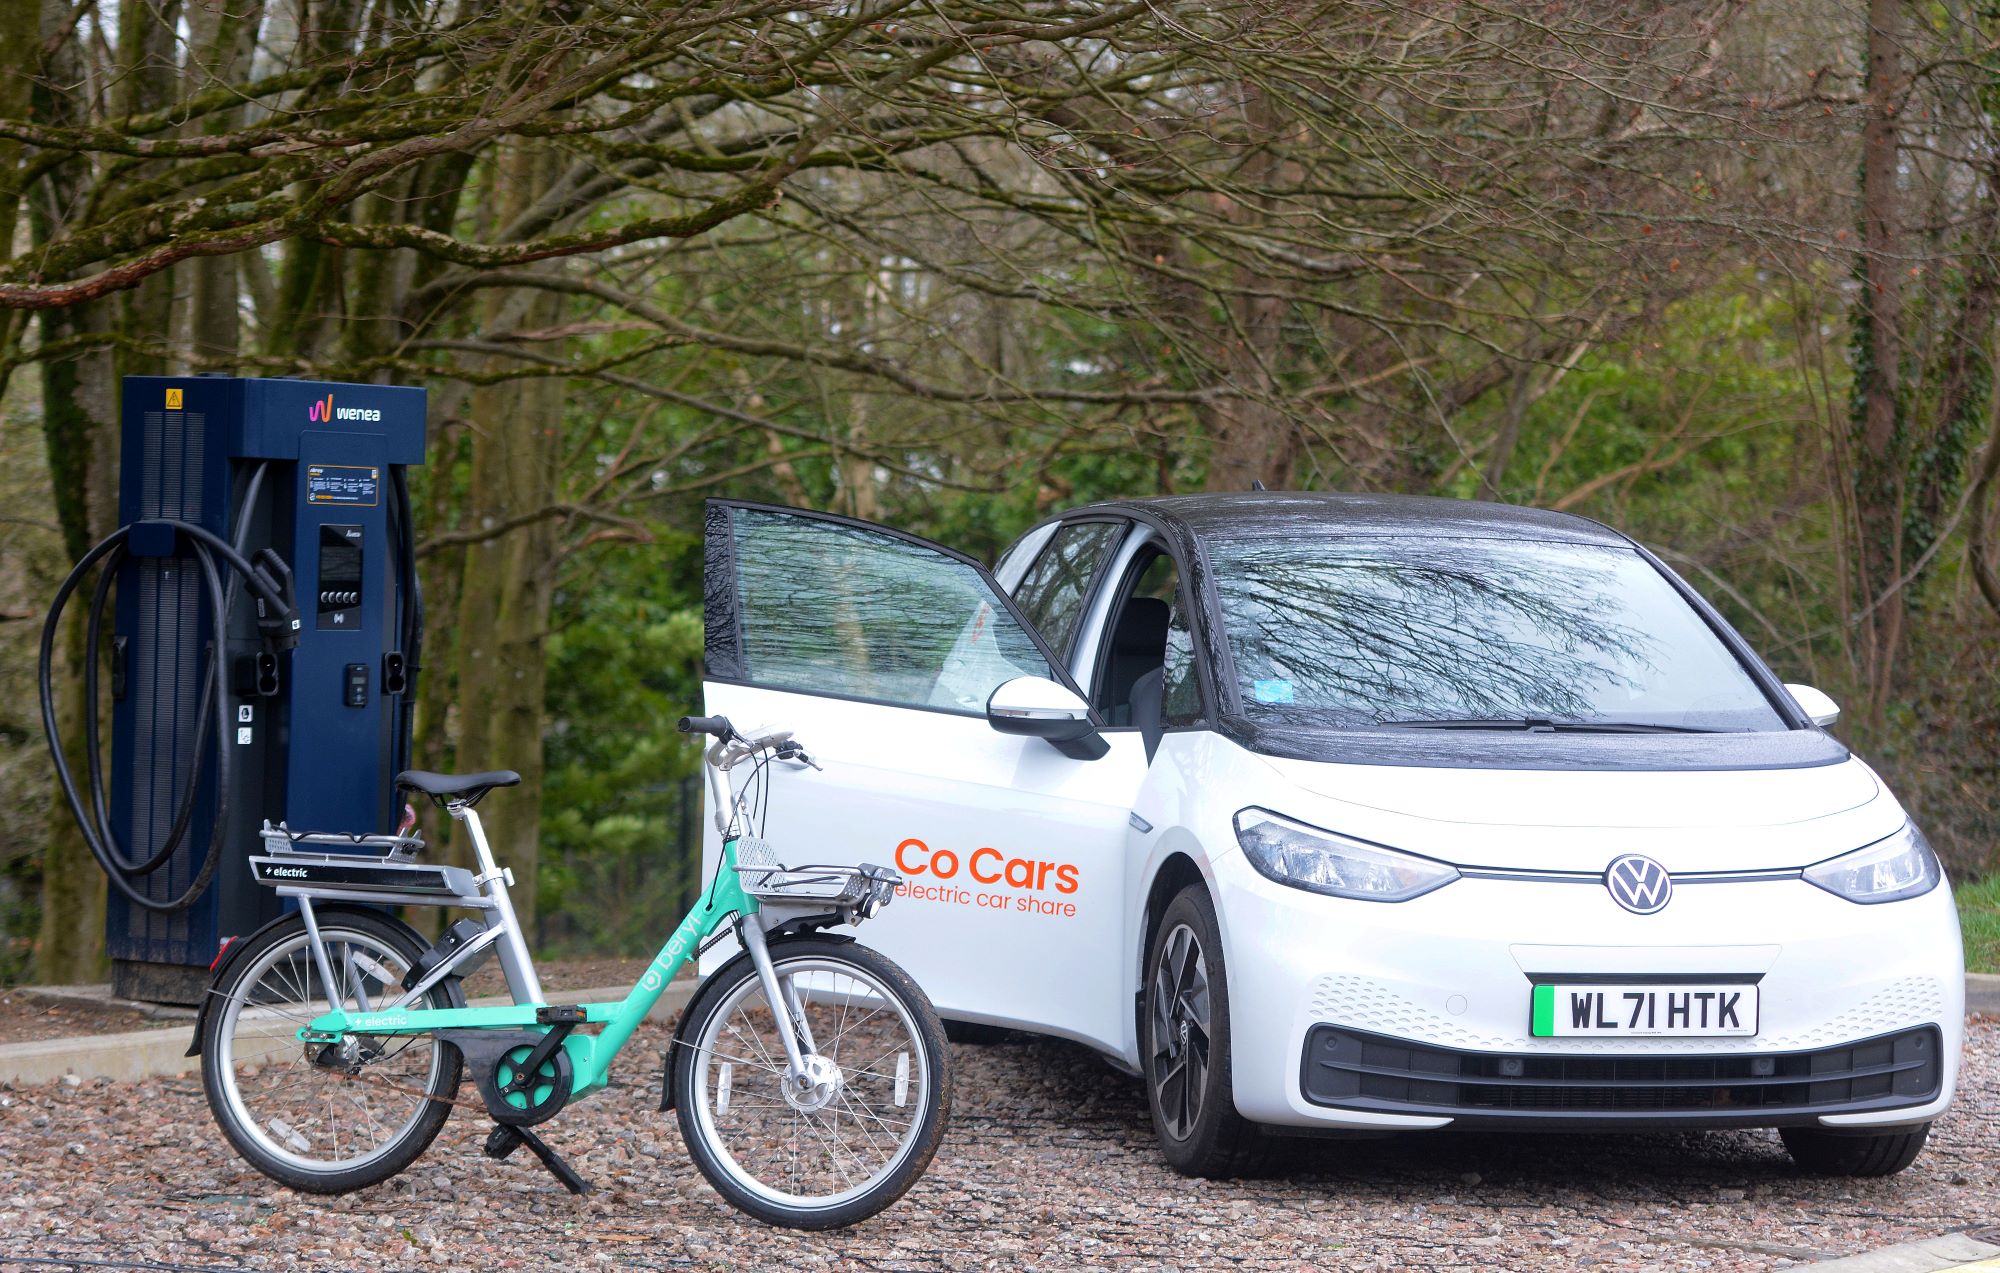 charger, e-bike and electric vehicle